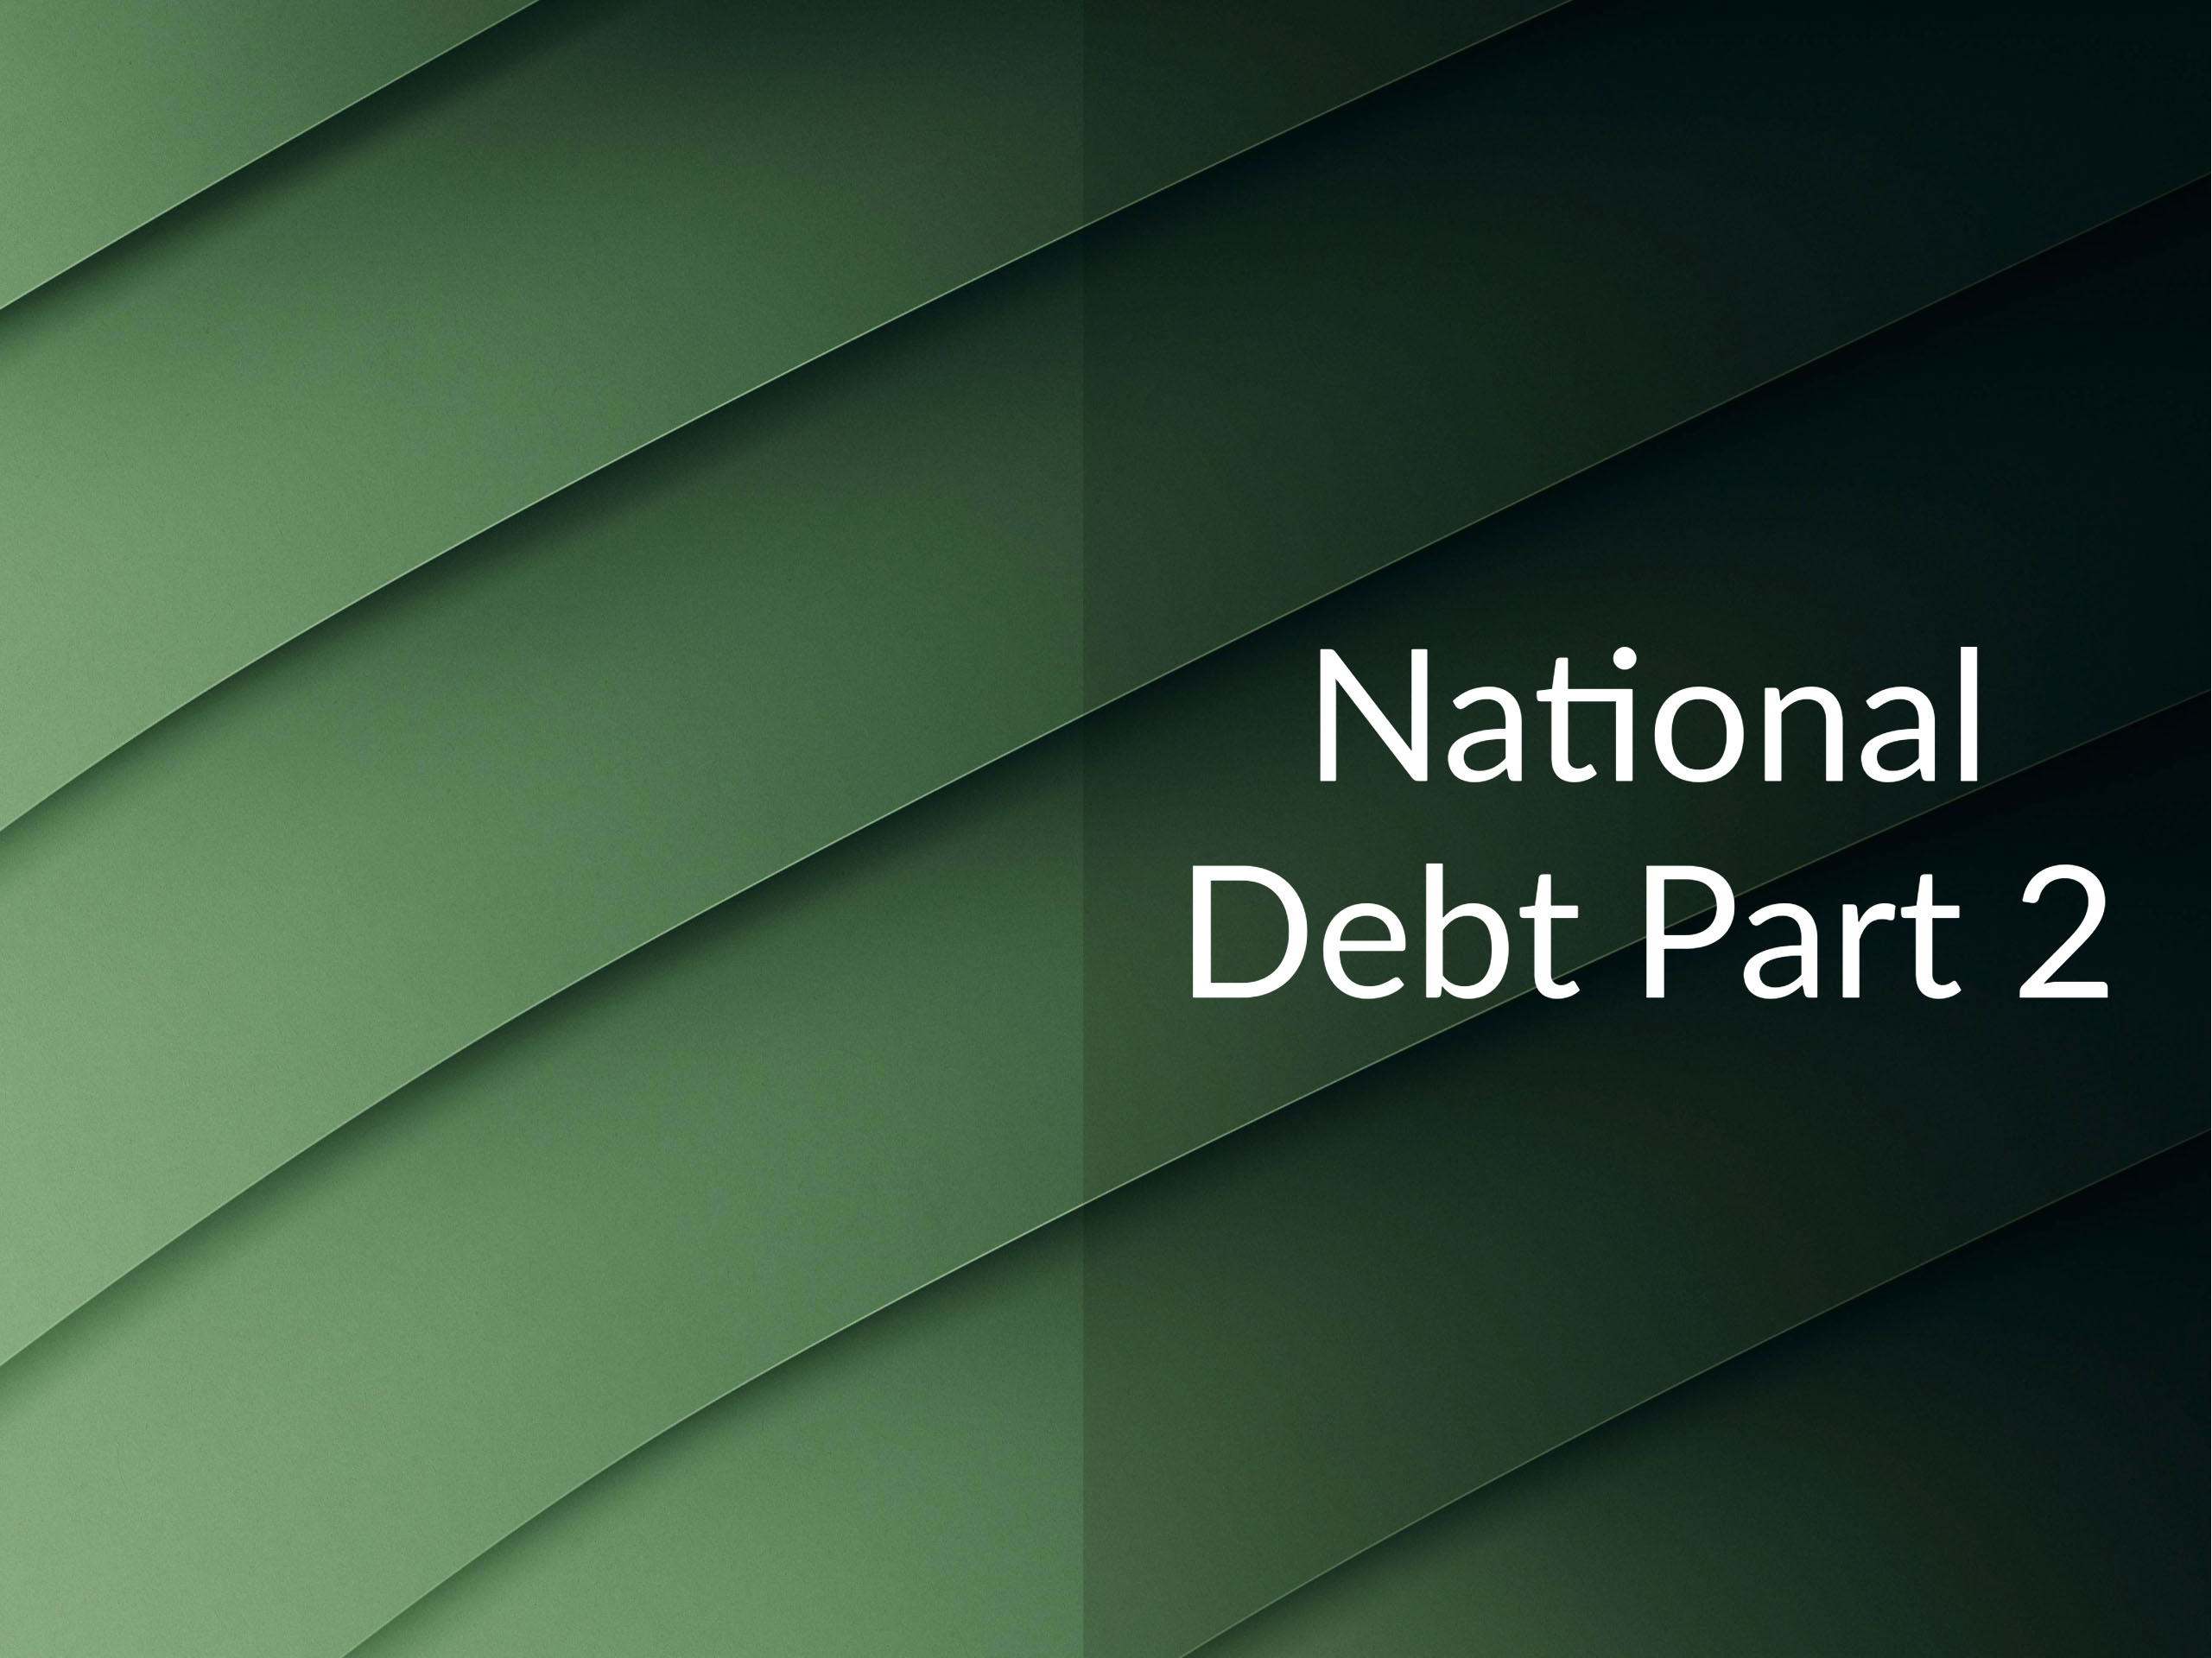 Abstract architecture with the caption "National Debt Part 2"